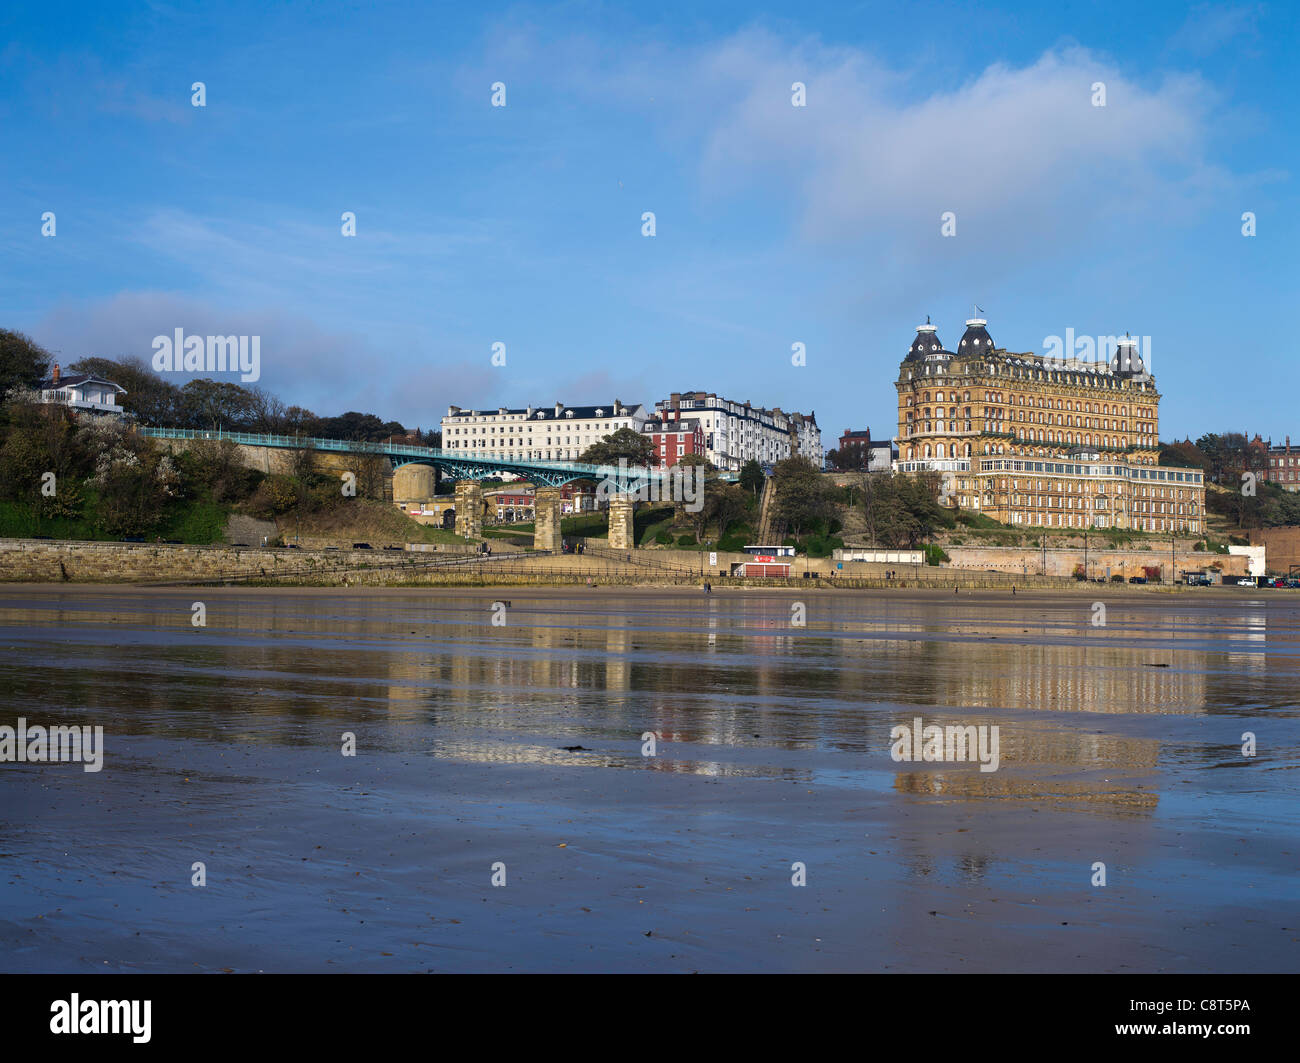 dh le Grand Hotel spa pont SCARBOROUGH NORD YORKSHIRE Sud Bay bord de mer angleterre plage royaume-uni Banque D'Images